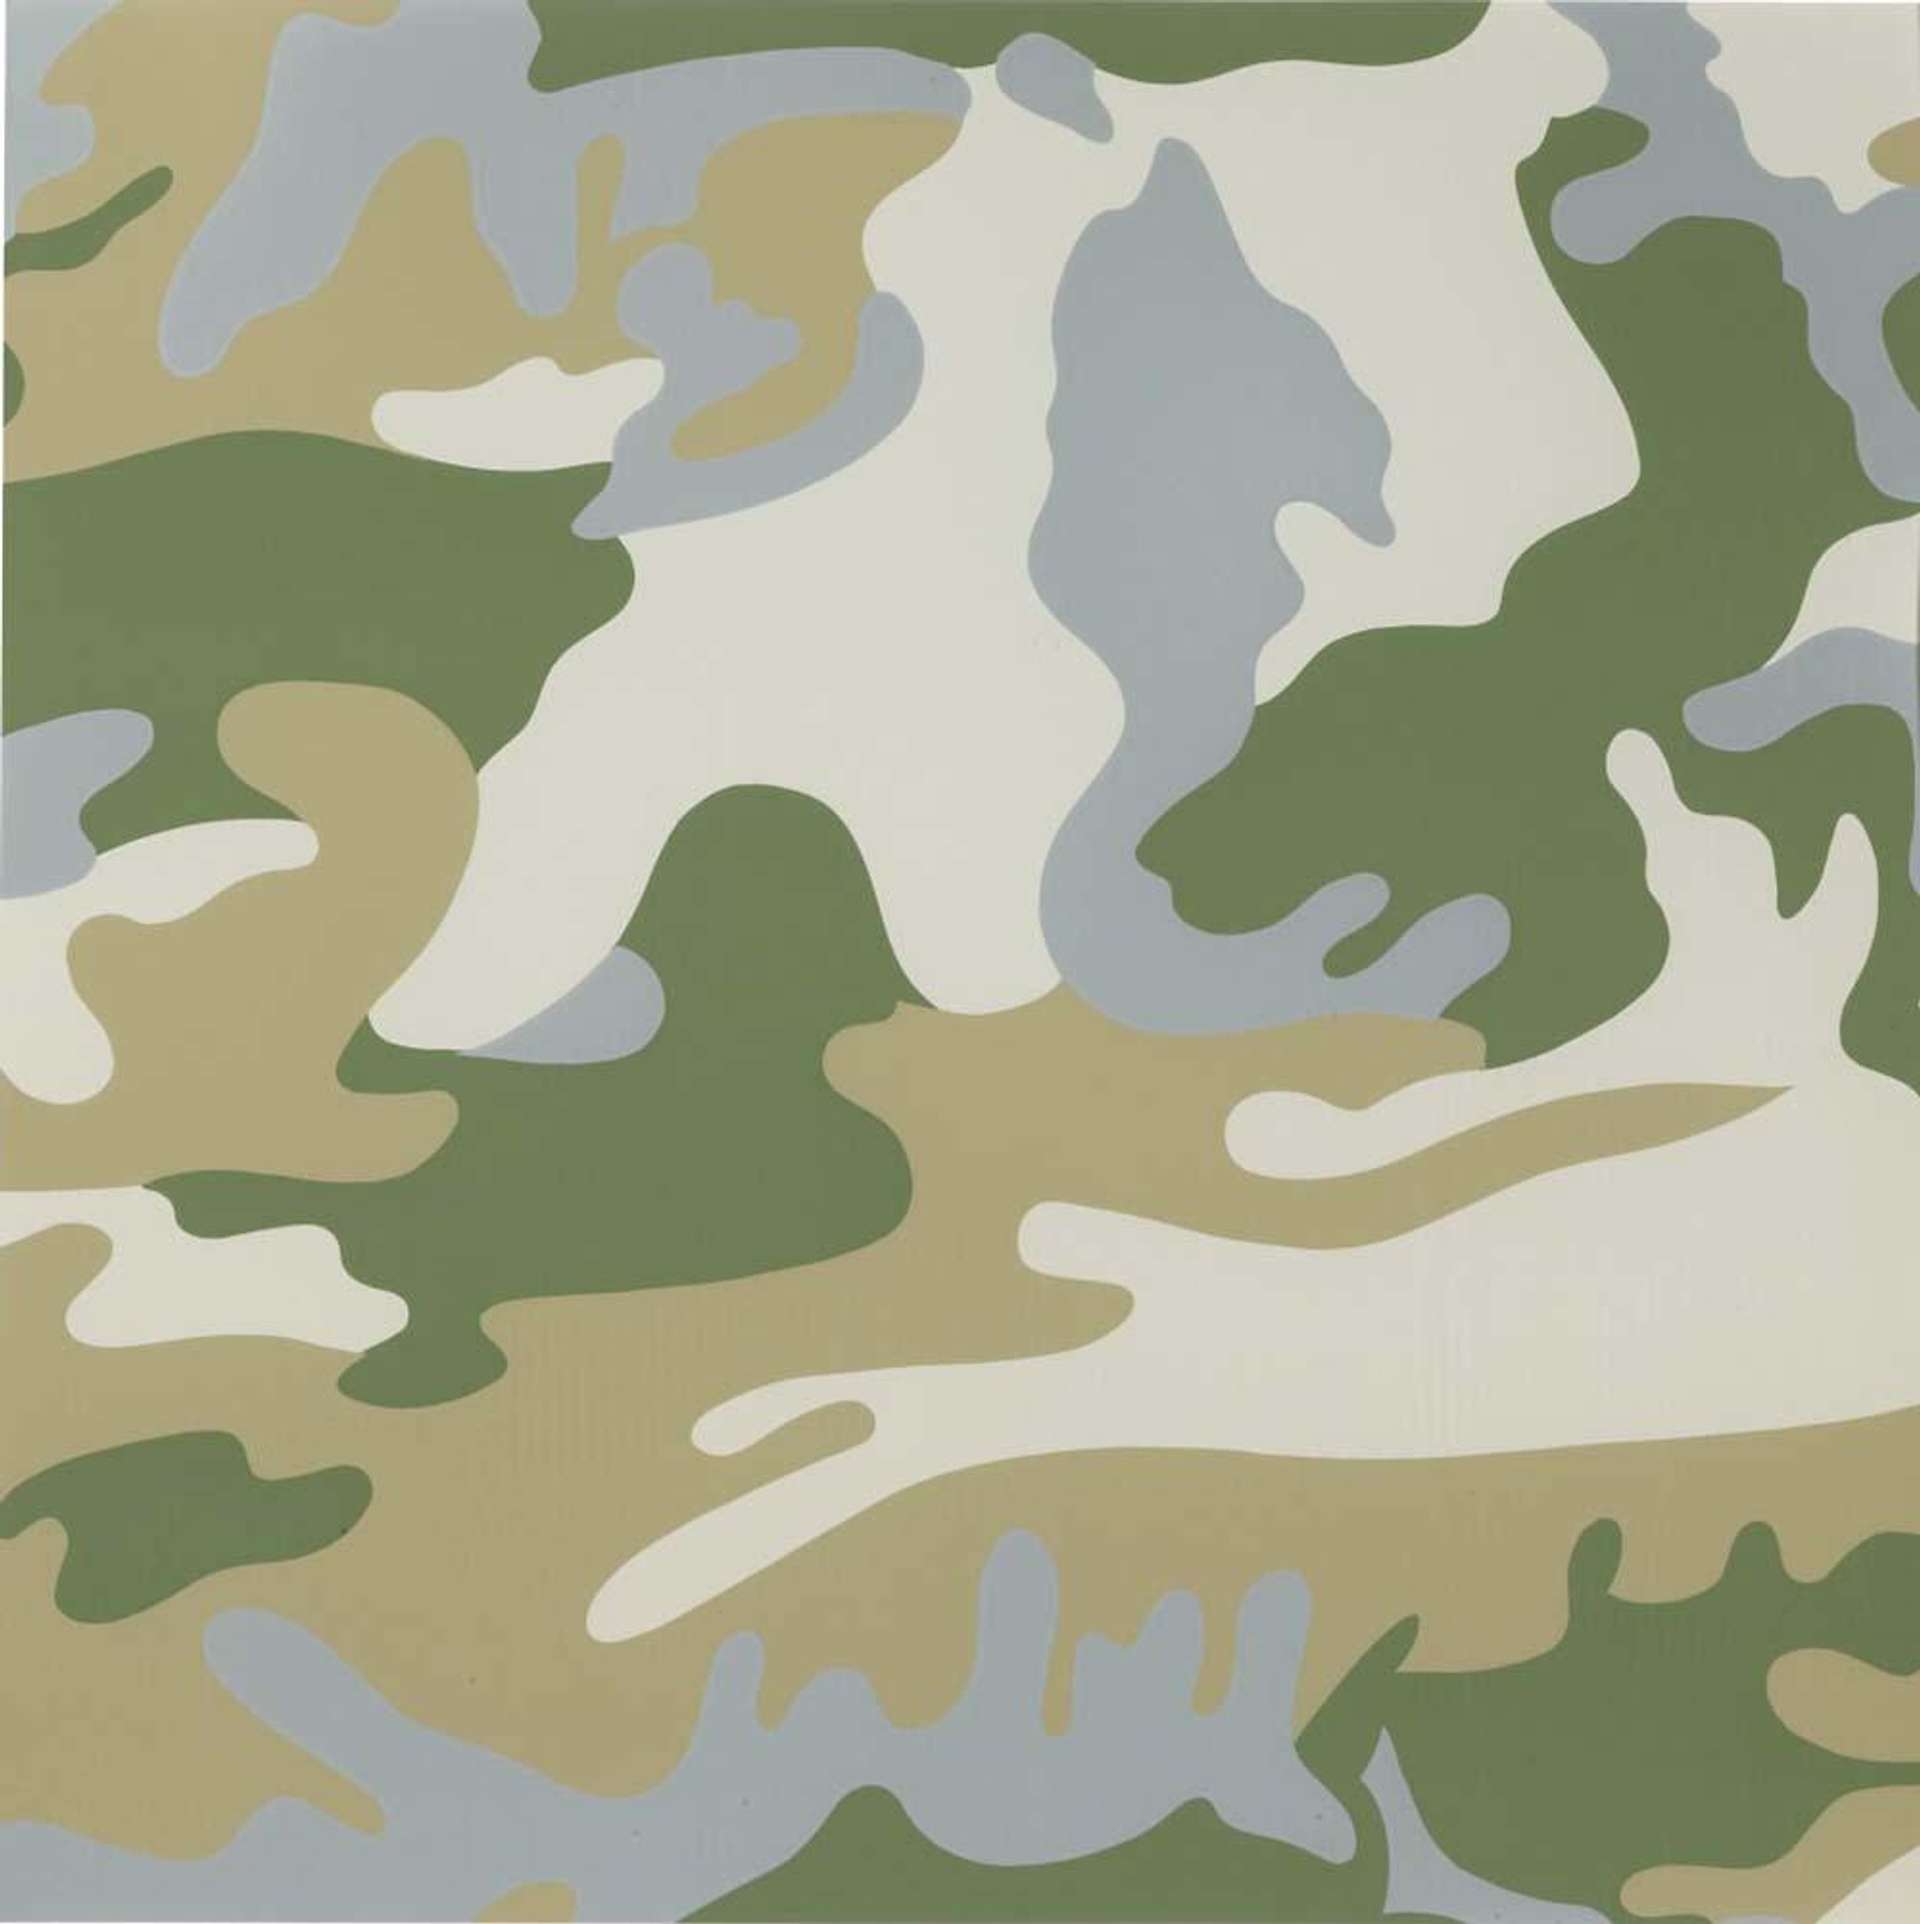 Camouflage (F. & S. II.407) by Andy Warhol